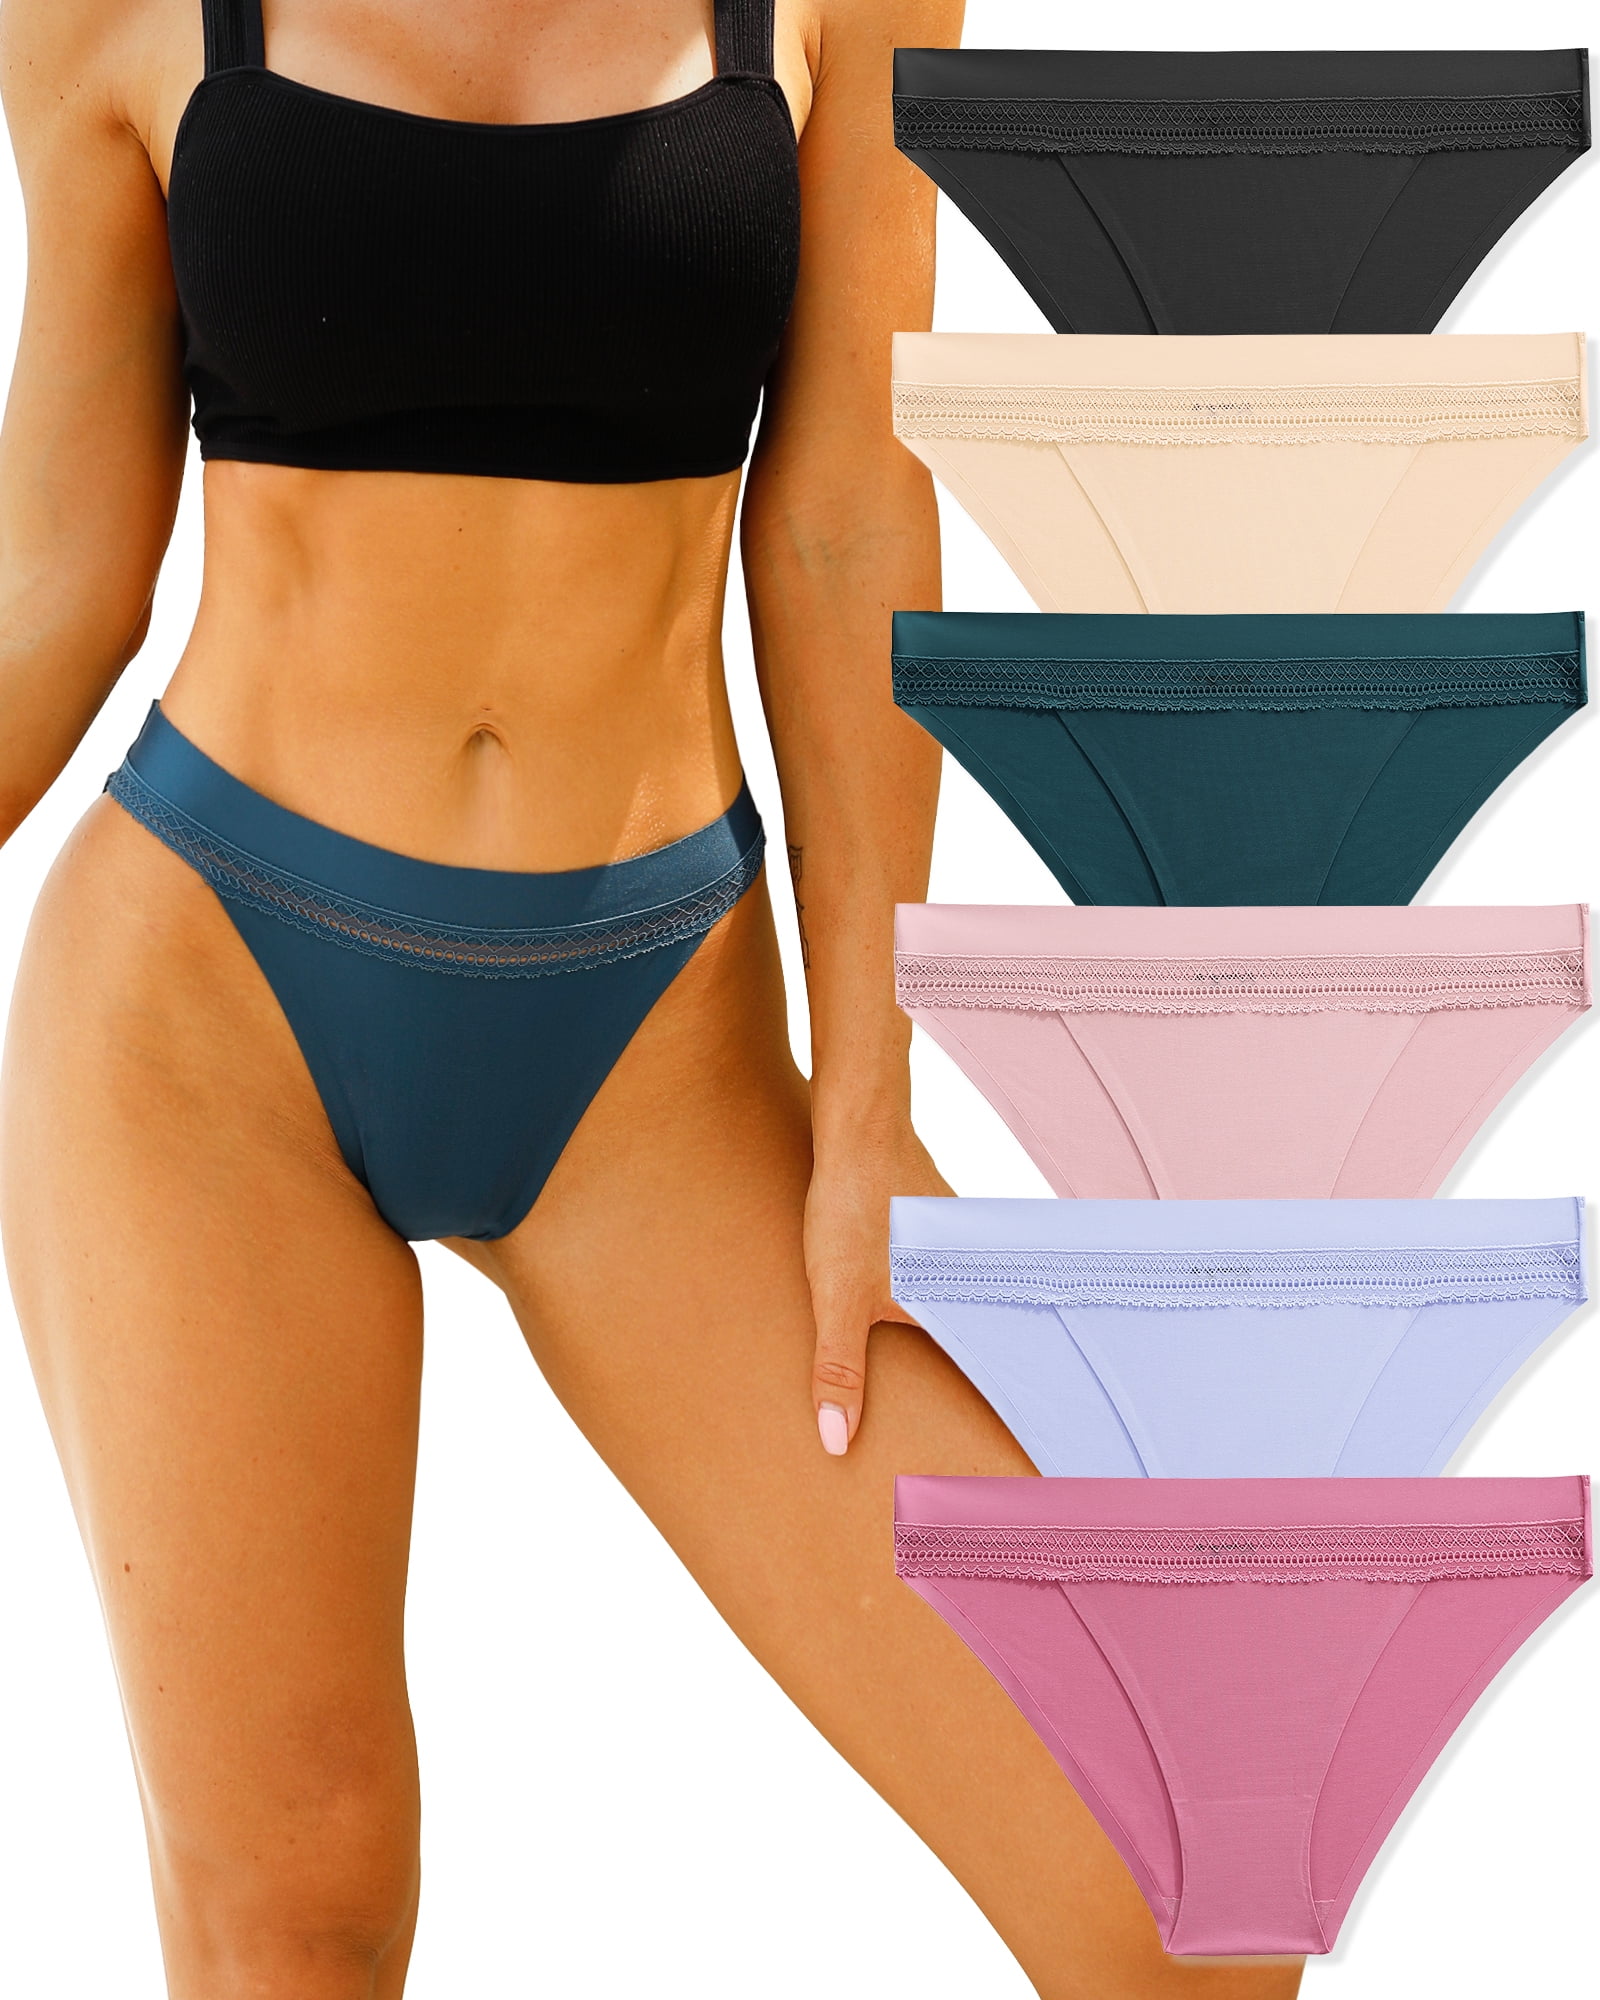 Finetoo 6 Pack Seamless Underwear for Women High Cut Bikini Panties Stretch  Invisible No Show Lace Cheeky Panty Pack